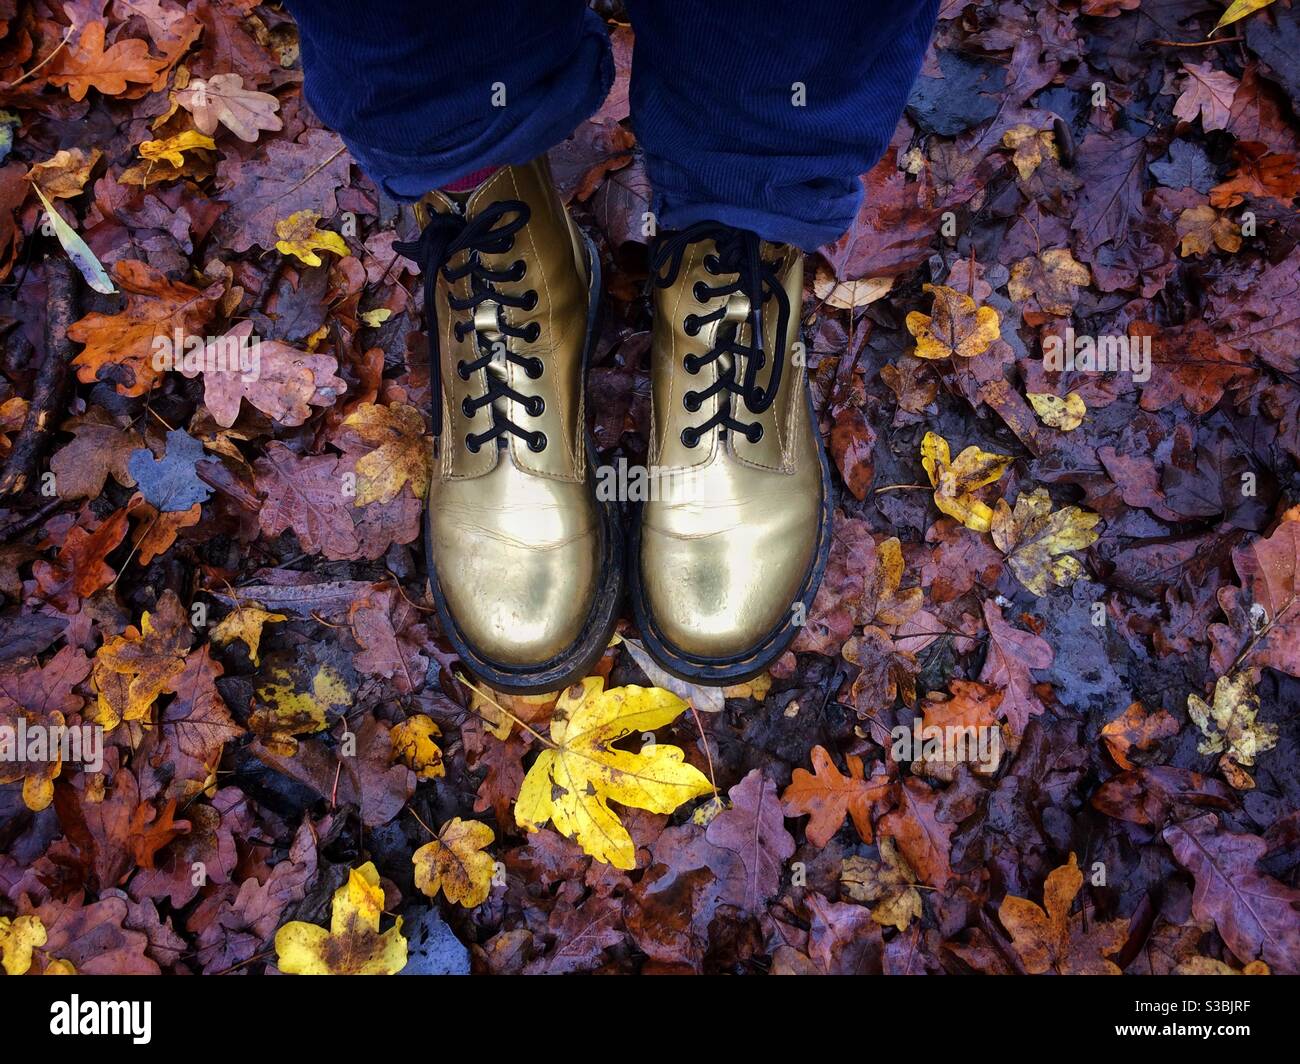 A woman’s feet and lower legs, standing in wet rainy autumn leaves wearing gold Dr Marten boots and blue corduroy trousers Stock Photo